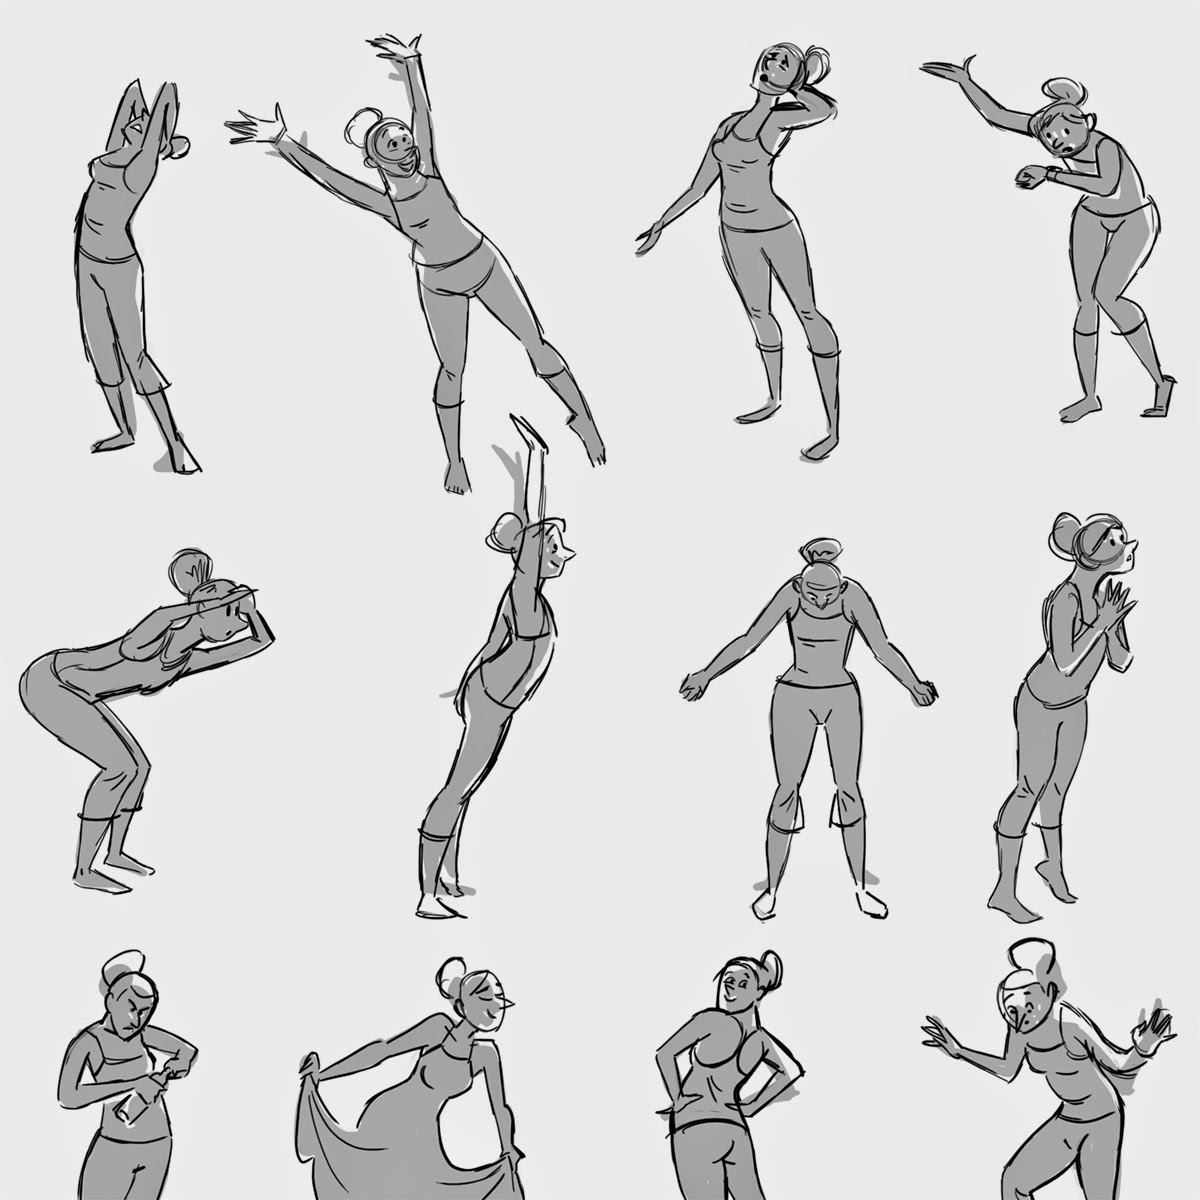 Learning drawing principles: poses